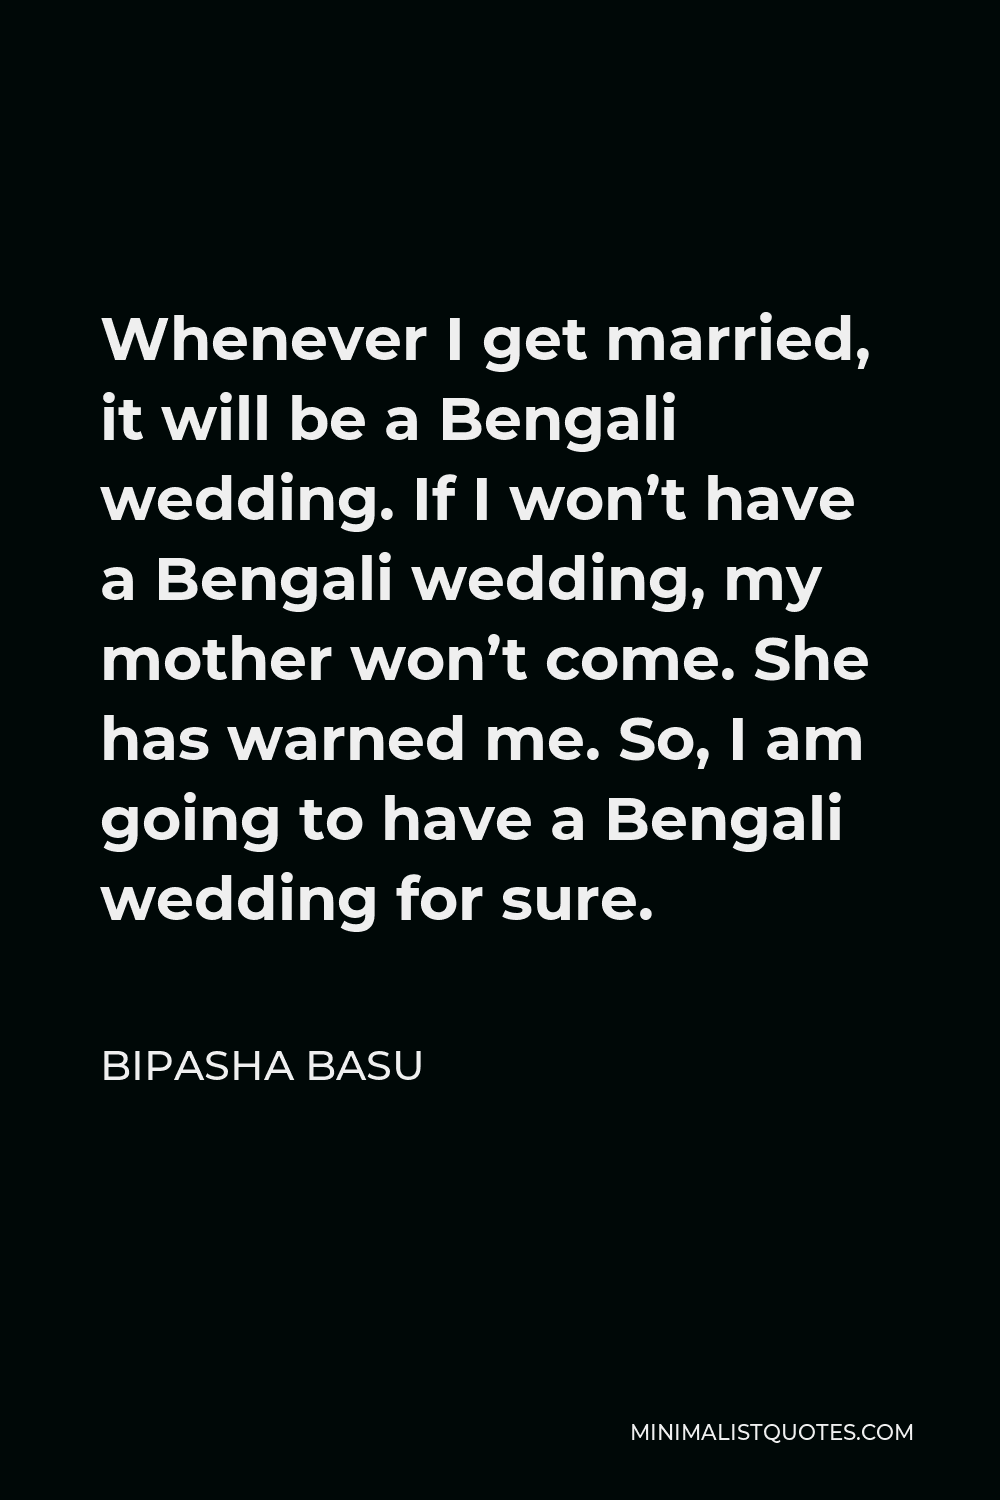 Bipasha Basu Quote - Whenever I get married, it will be a Bengali wedding. If I won’t have a Bengali wedding, my mother won’t come. She has warned me. So, I am going to have a Bengali wedding for sure.